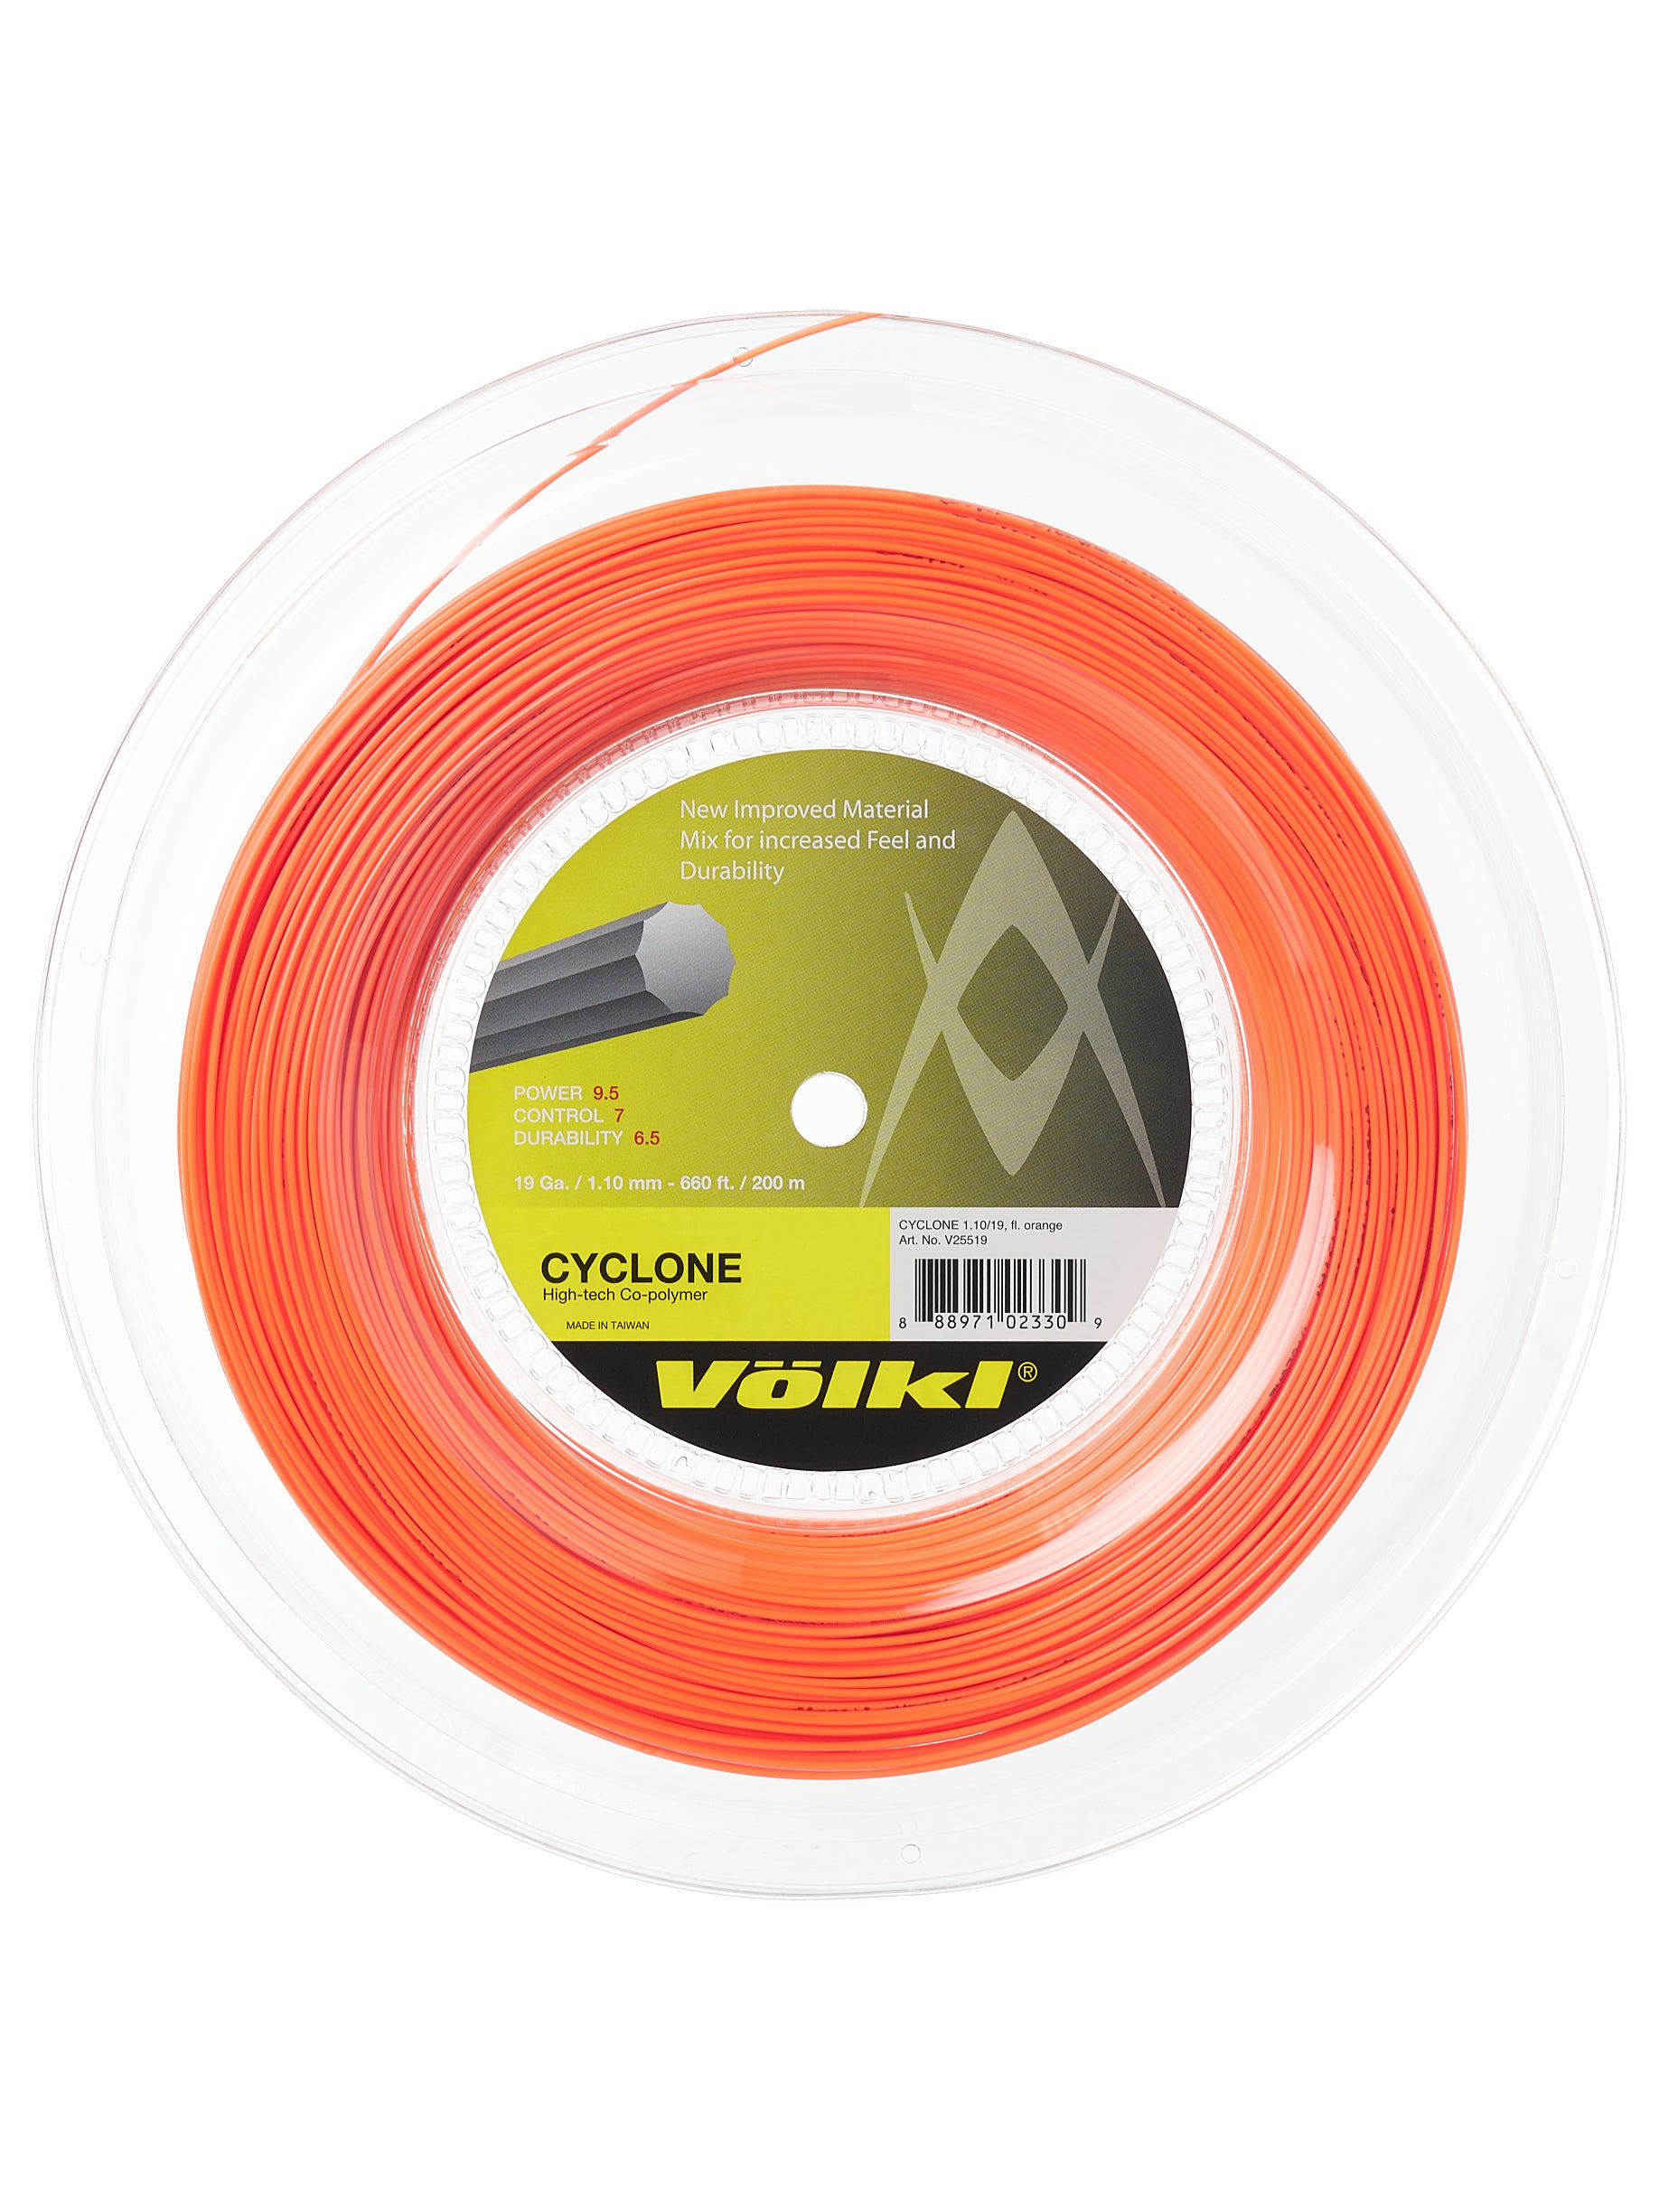 Volkl Cyclone Tennis String 200m Reel Available in different colours and gauges 